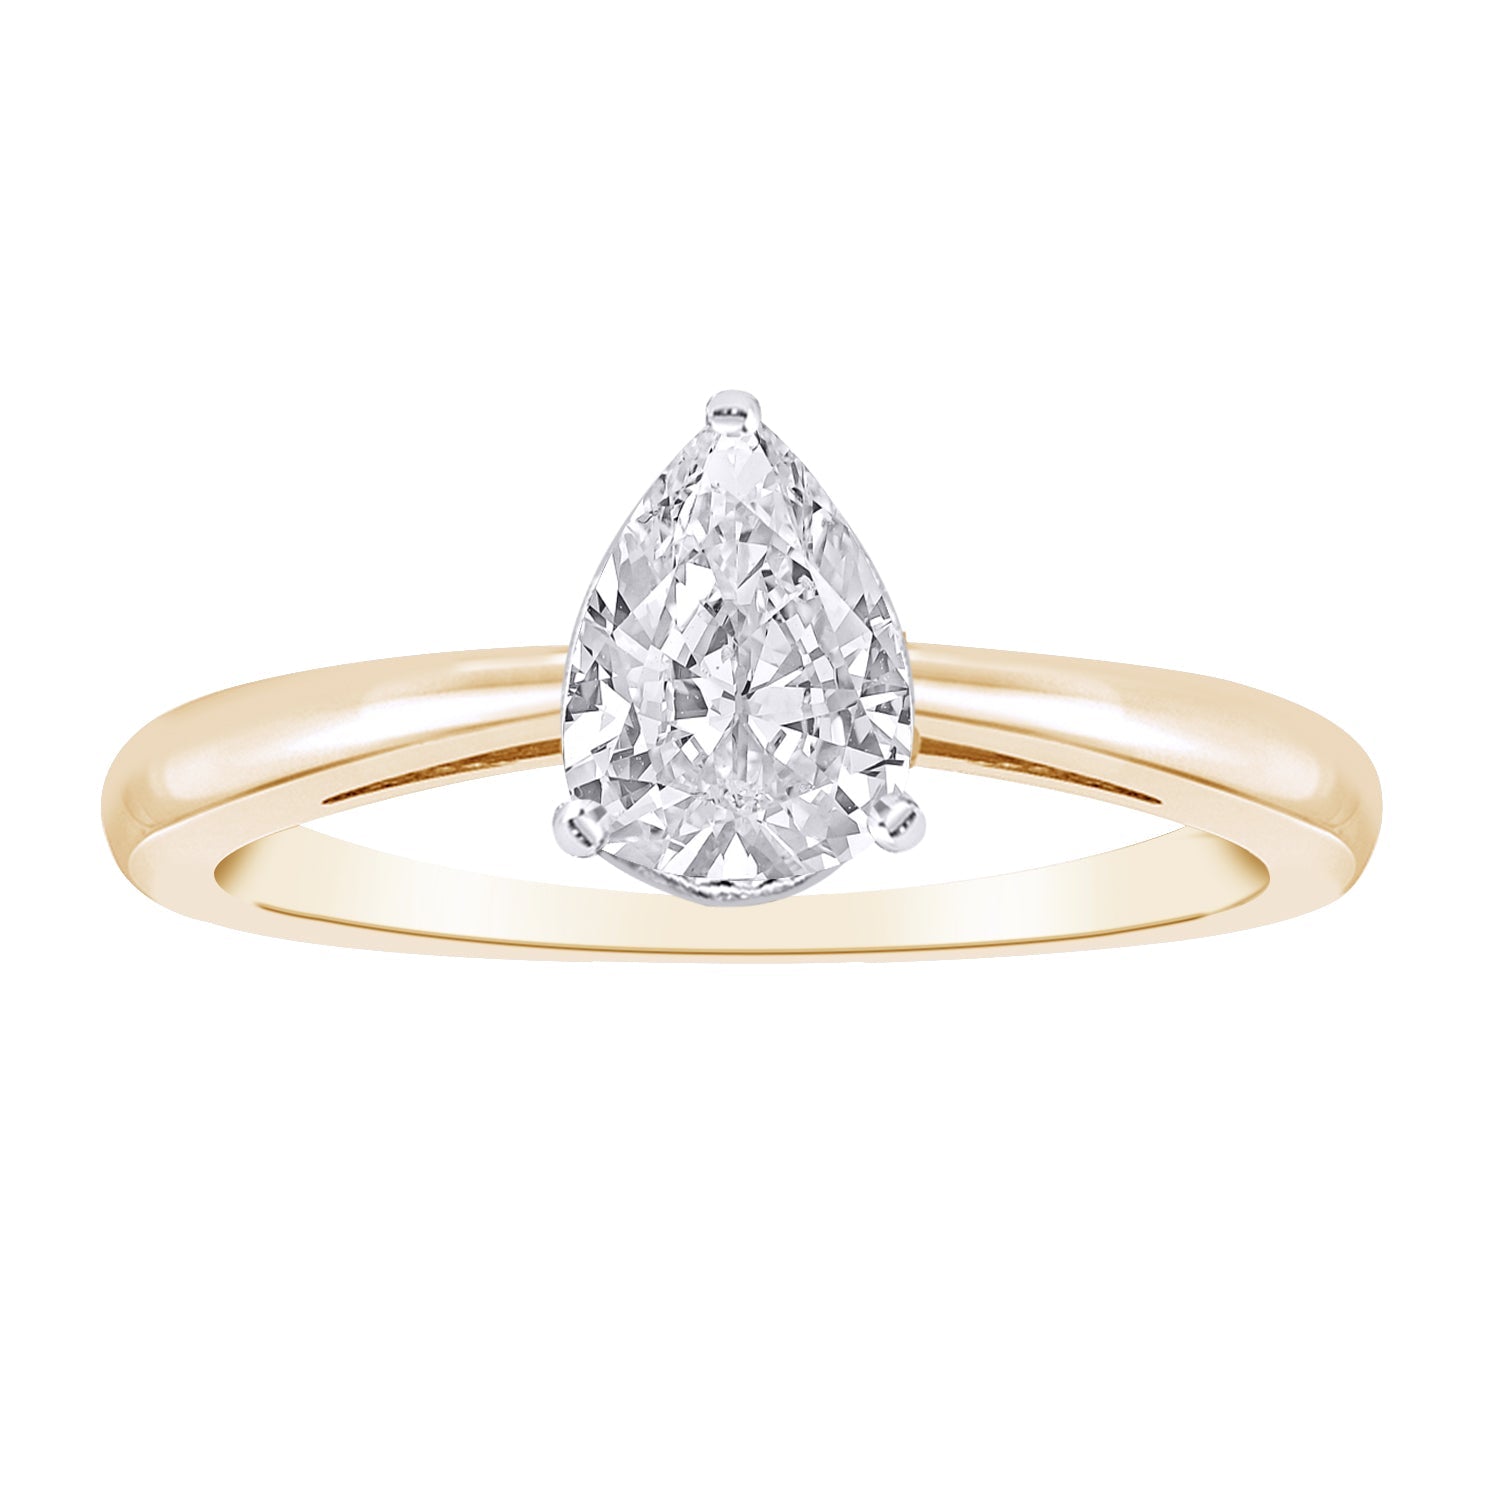 14K 1.00 CT LAB GROWN DIAMOND PEAR SOLITAIRE ENGAGEMENT RING.